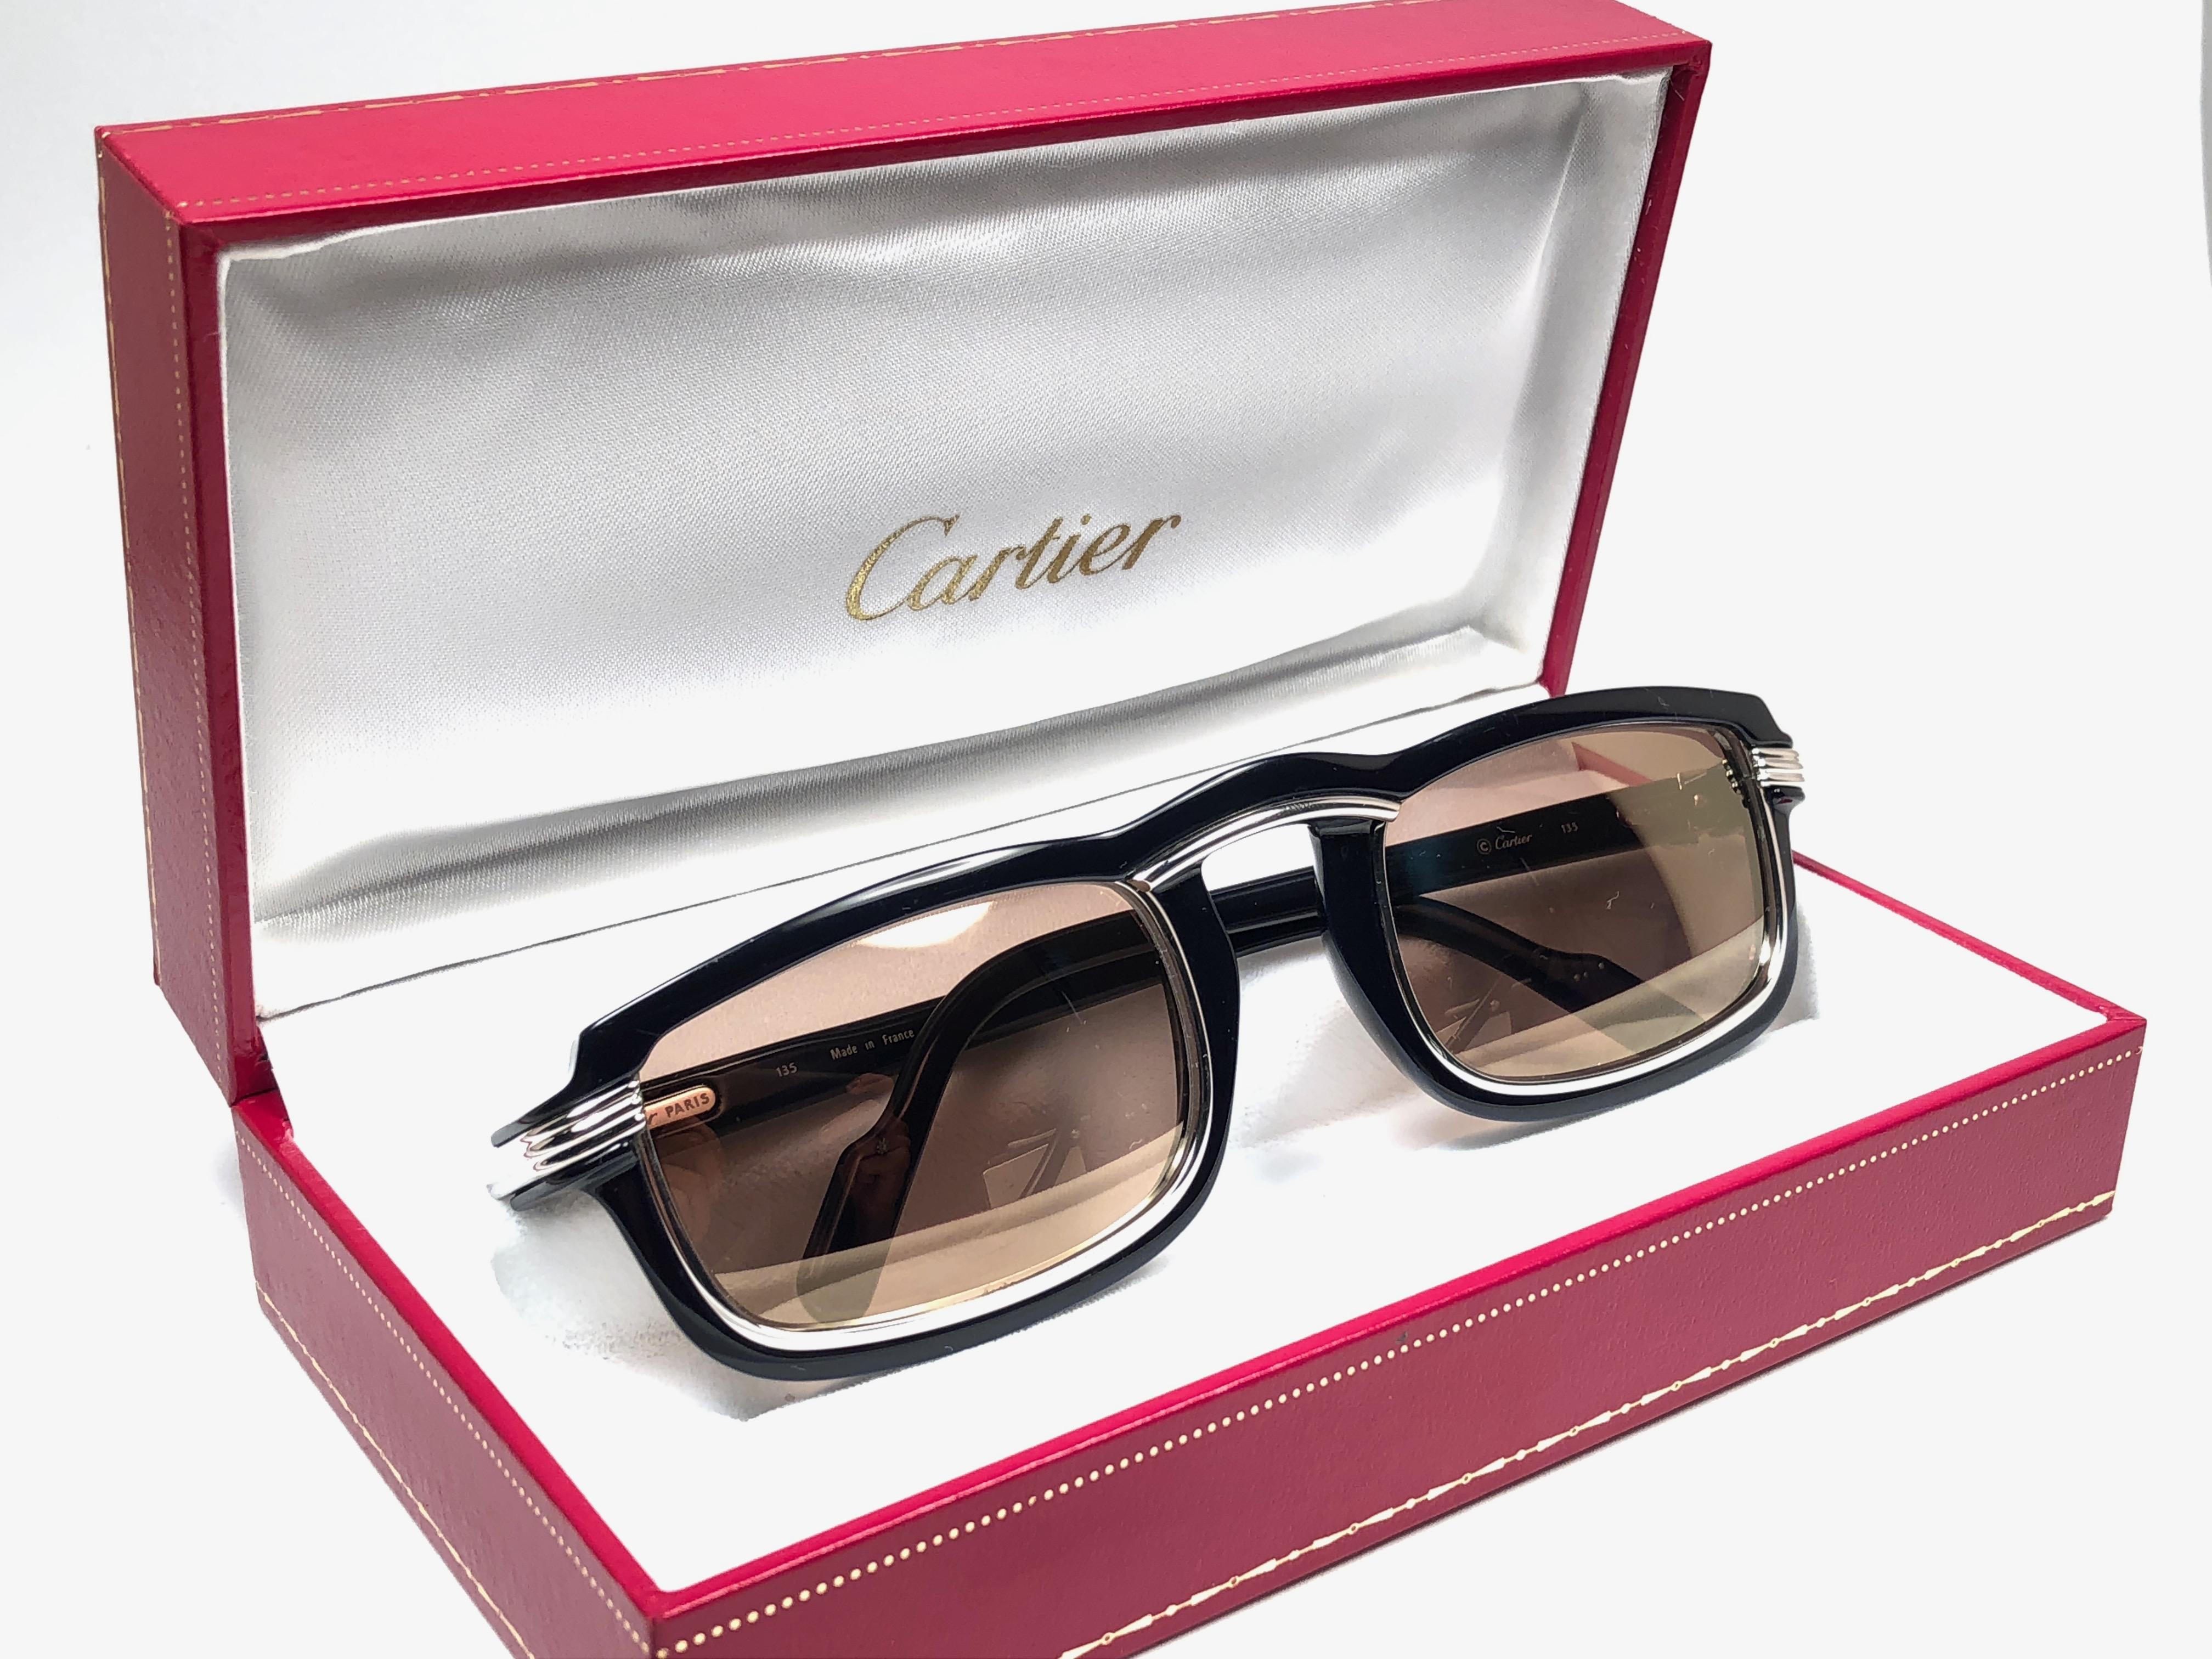 1991 Original Cartier Vertigo Art Deco Sunglasses with spotless amazing brown medium mirrored lenses (uv protection). 
Frame has the famous platinum accents in the middle and on the sides.
All hallmarks. Cartier signs on the earpaddles. Both arms